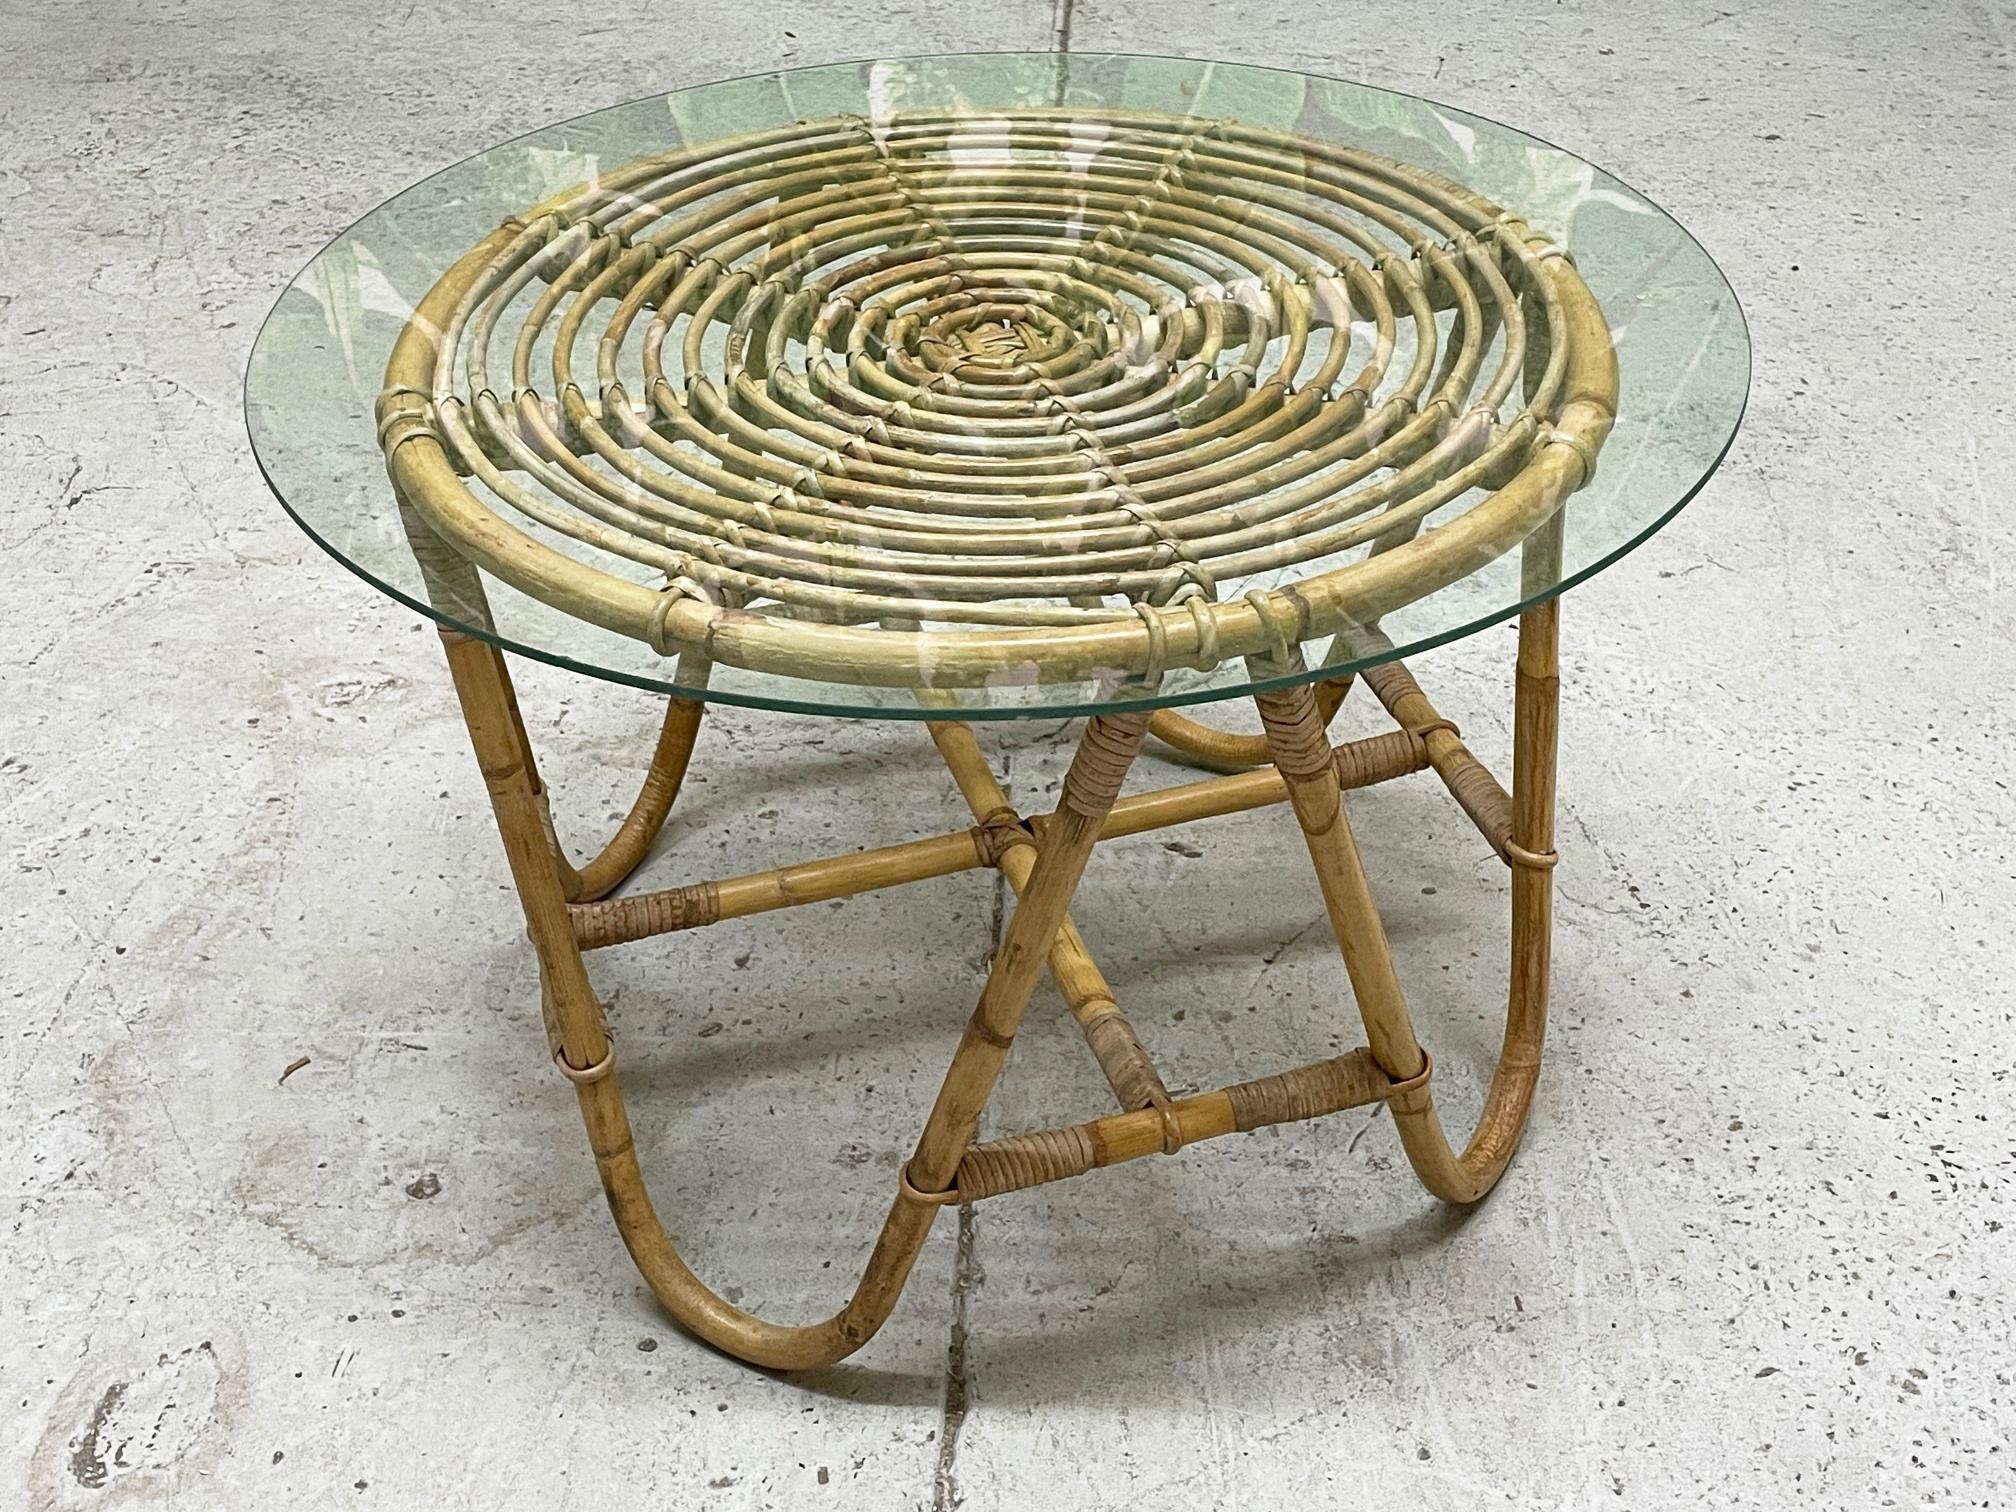 Vintage rattan side table features boho chic styling and a glass top. Good condition with minor imperfections consistent with age, see photos for condition details.
For a shipping quote to your exact zip code, please message us.
